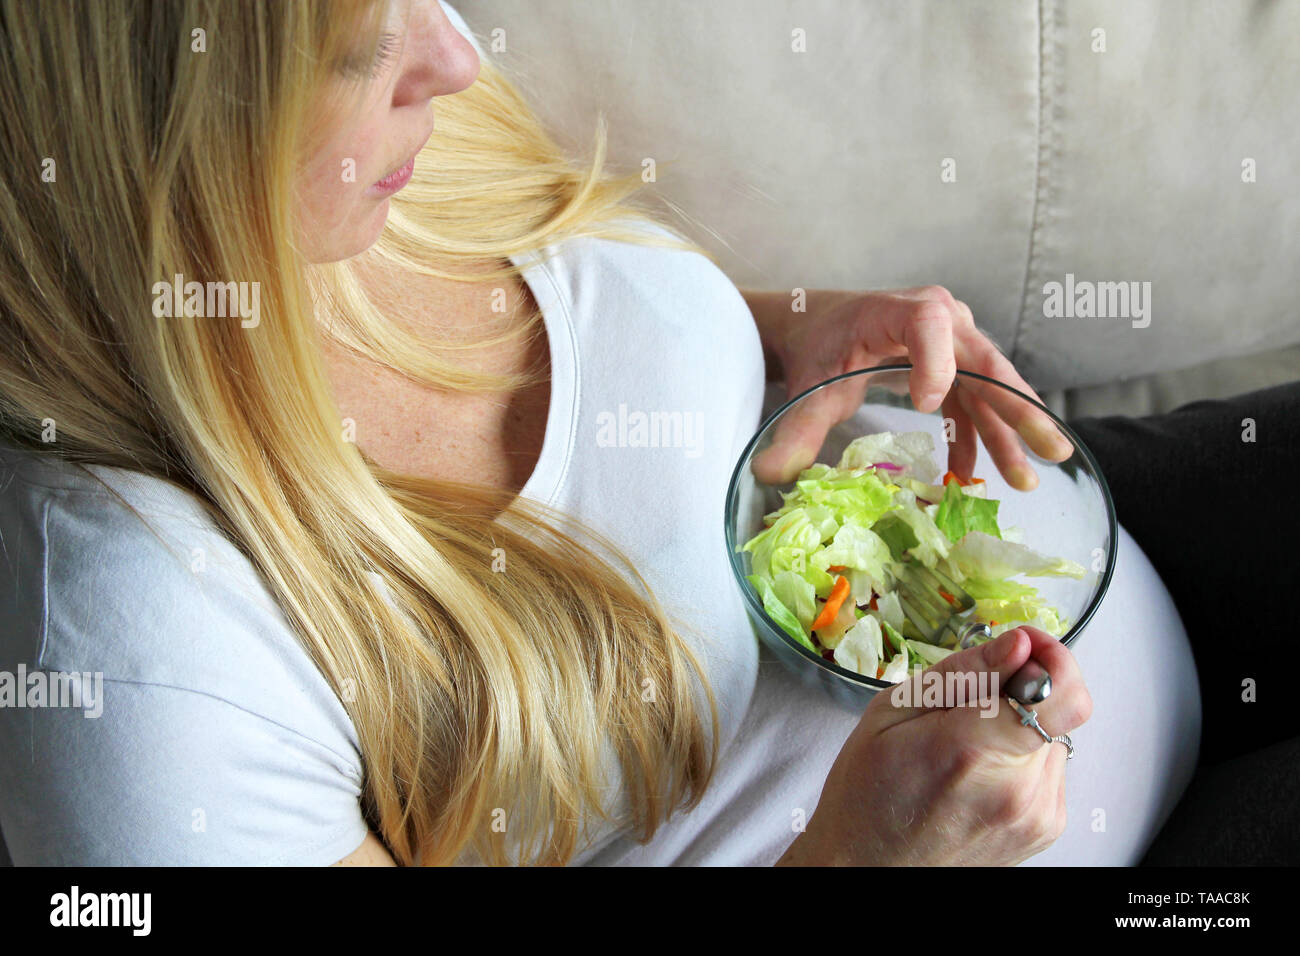 A healthy young pregnant woman with long blonde hair is sitting and resting while eating a leafy green salad. Stock Photo